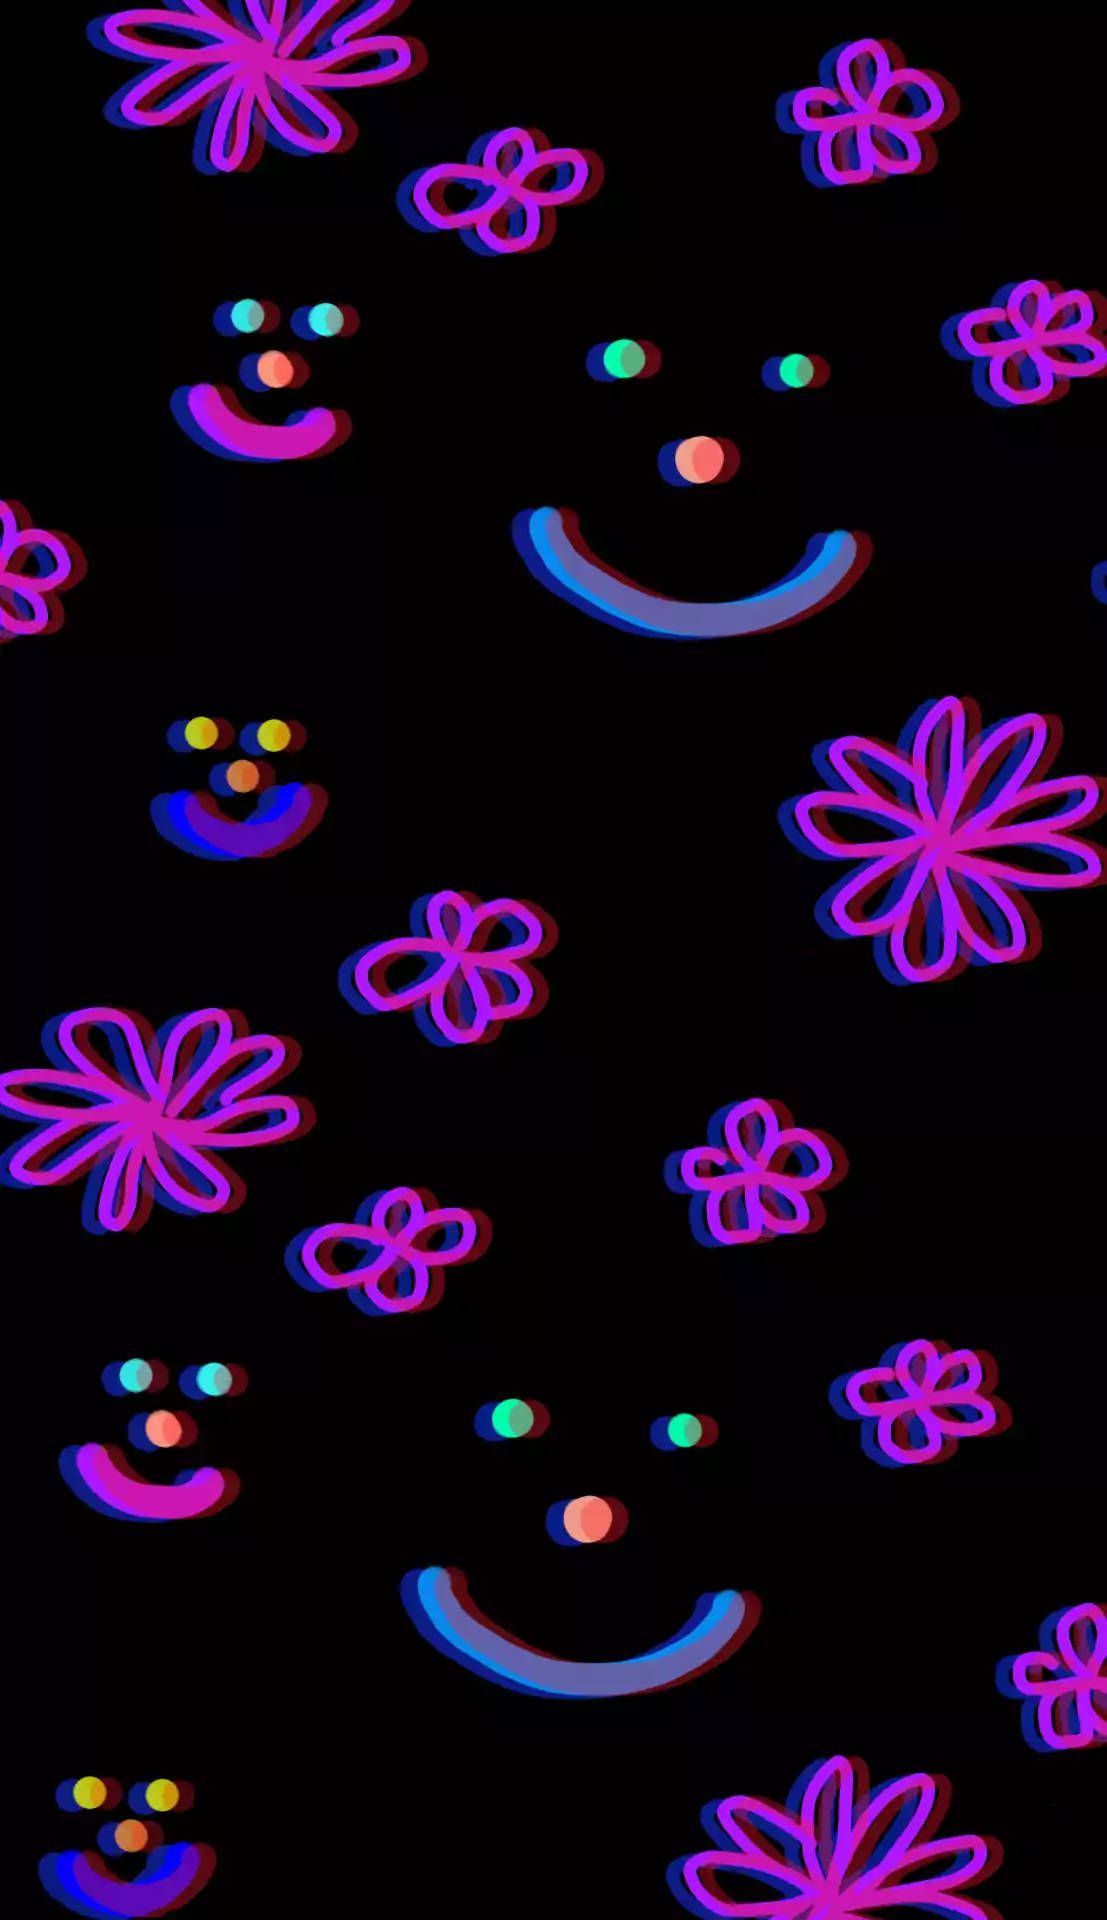 A group of flowers and smiley faces on black background - Weirdcore